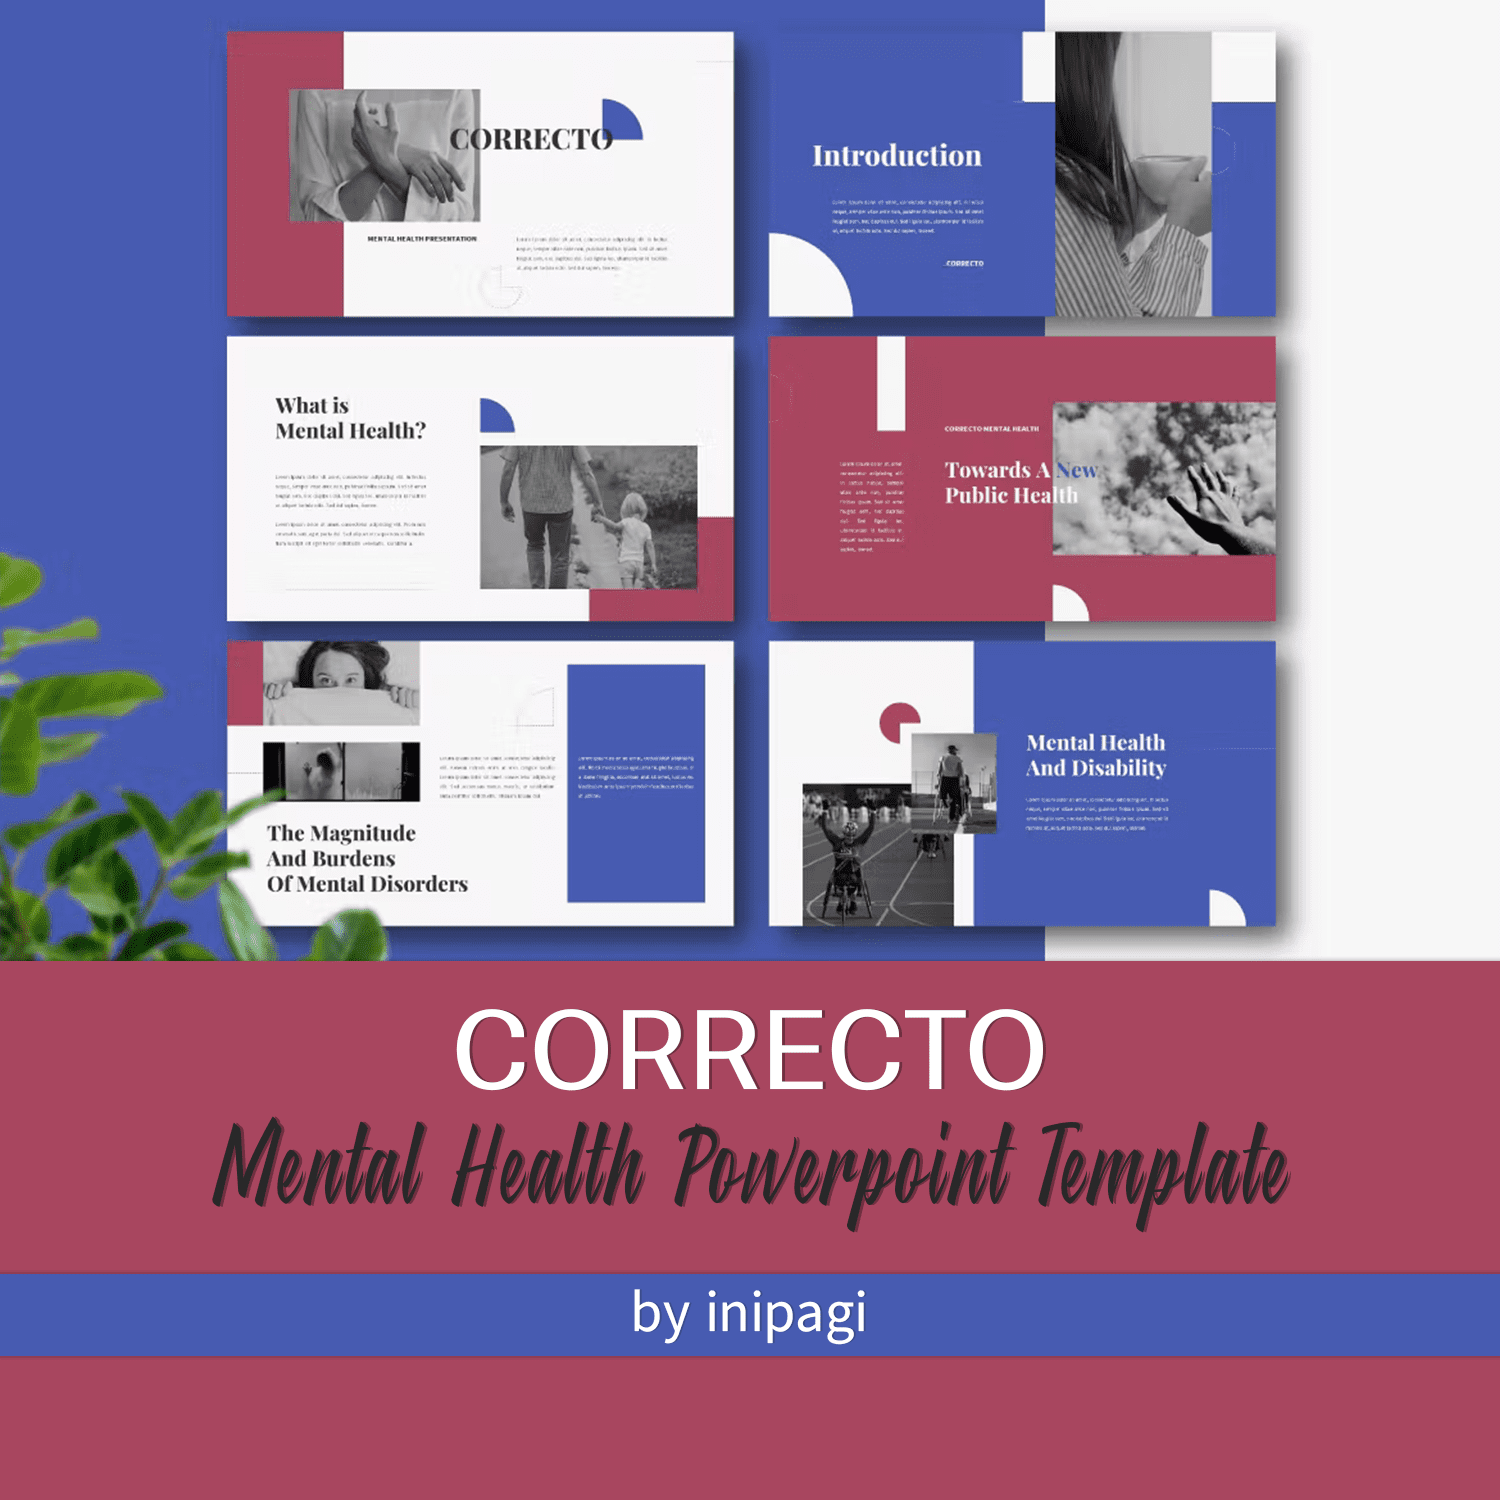 Correcto - Mental Health Powerpoint Template Cover.